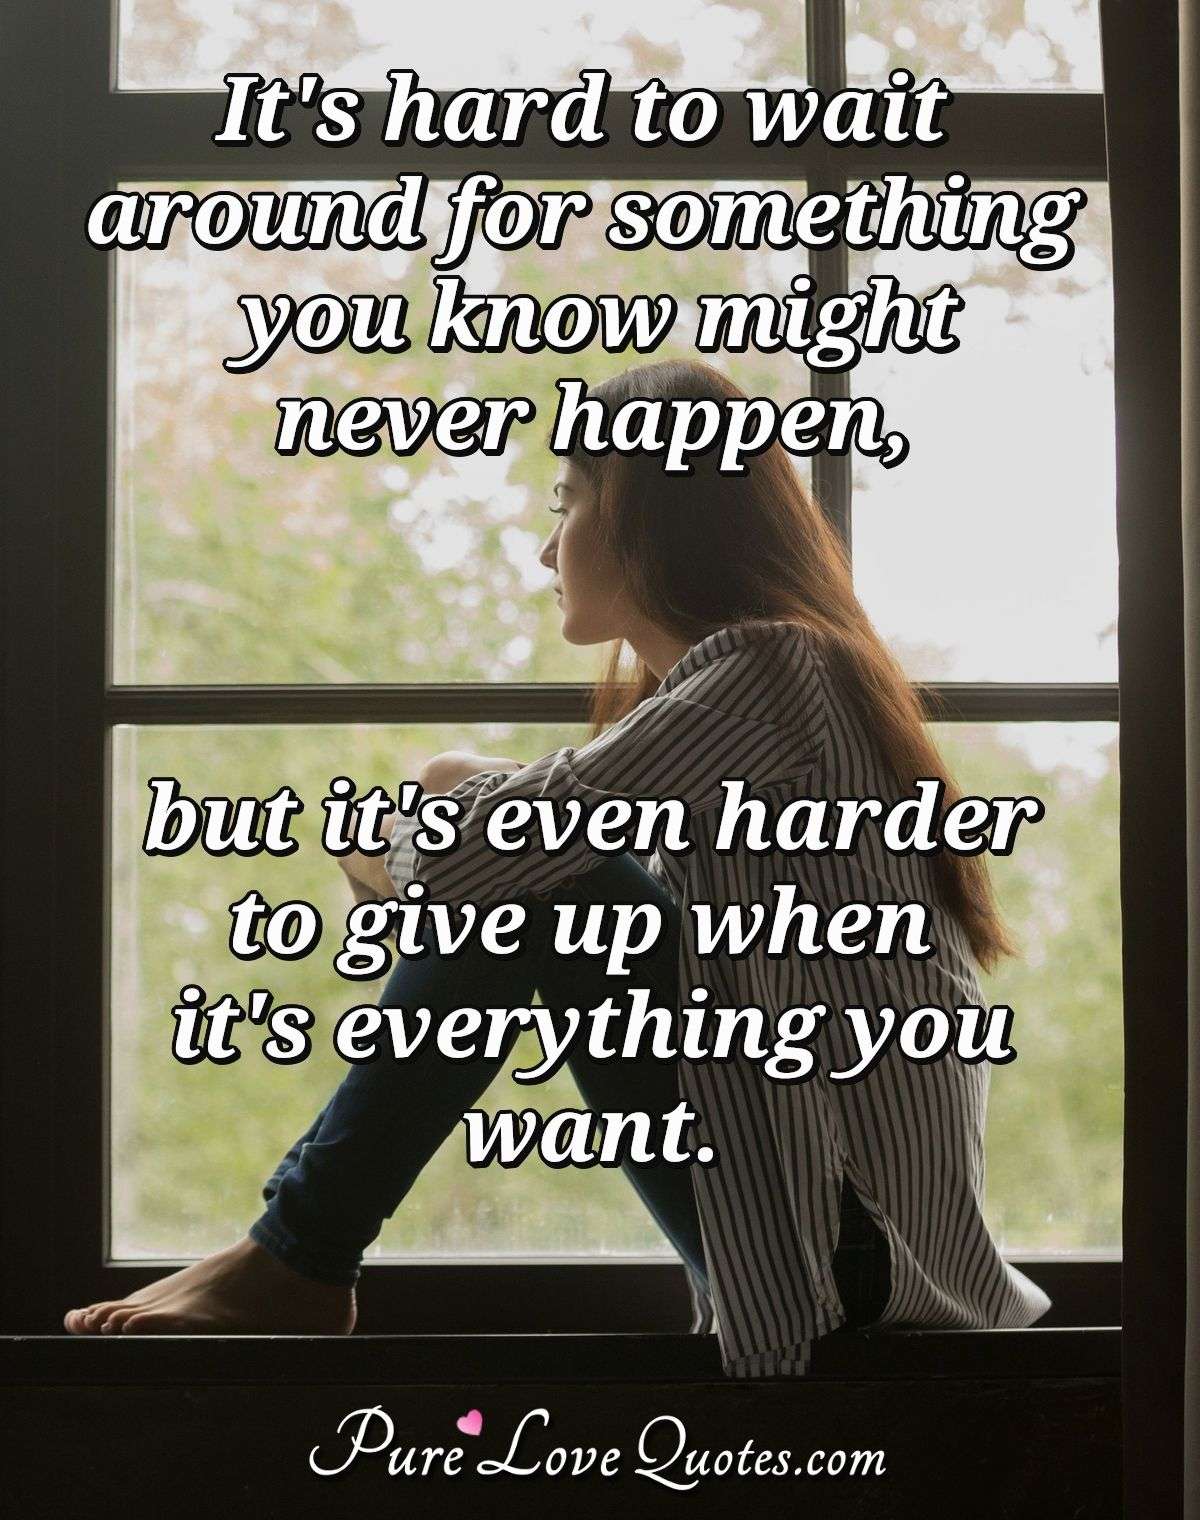 It's hard to wait around for something you know might never happen, but it's even harder to give up when it's everything you want. - Anonymous